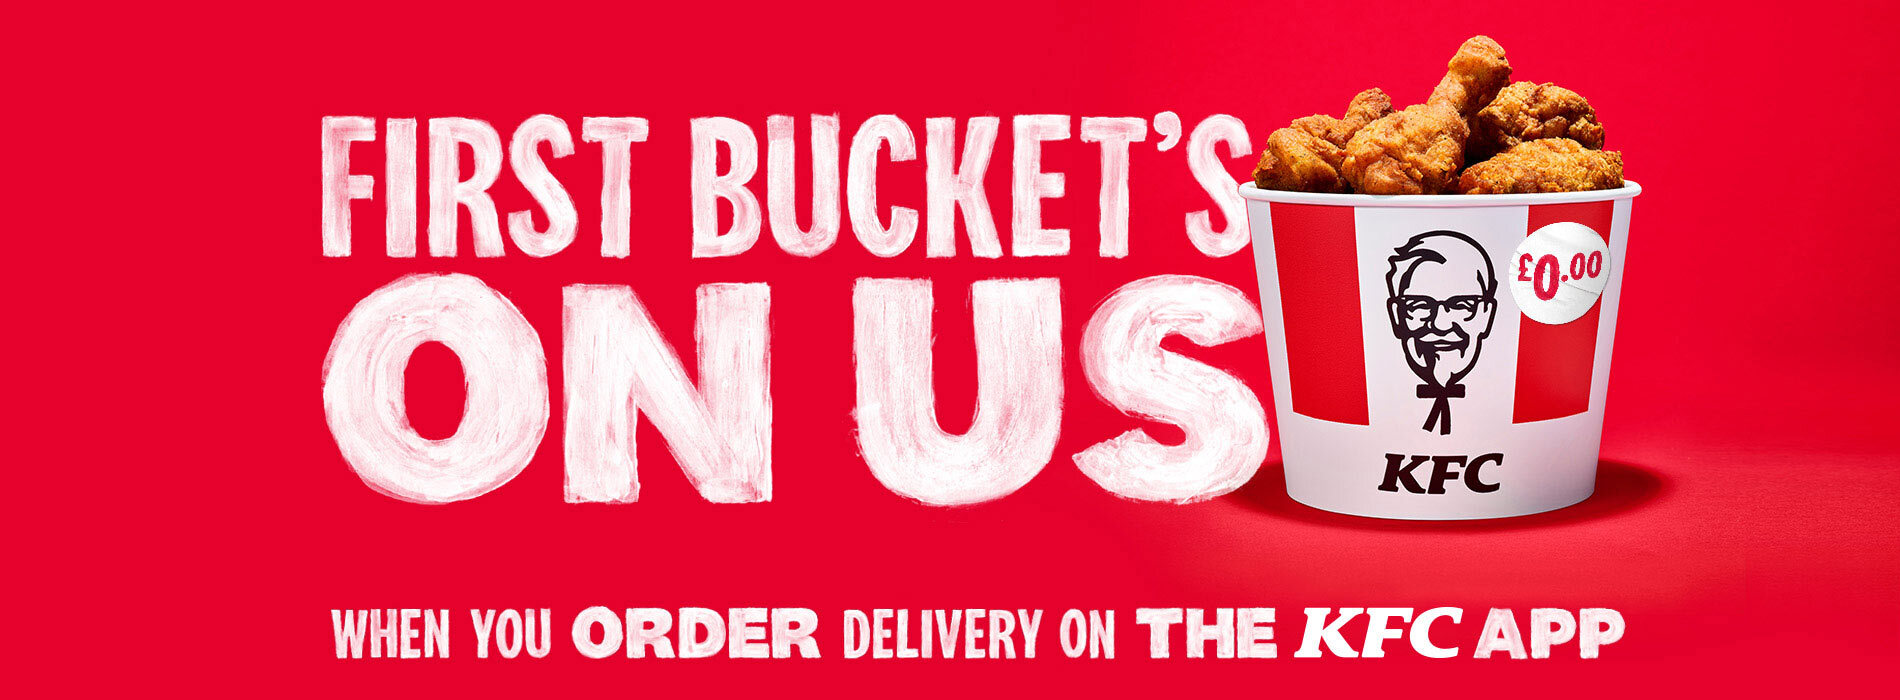 Kfc Offers And Big Deals App Takeaway And At Your Local Kfc